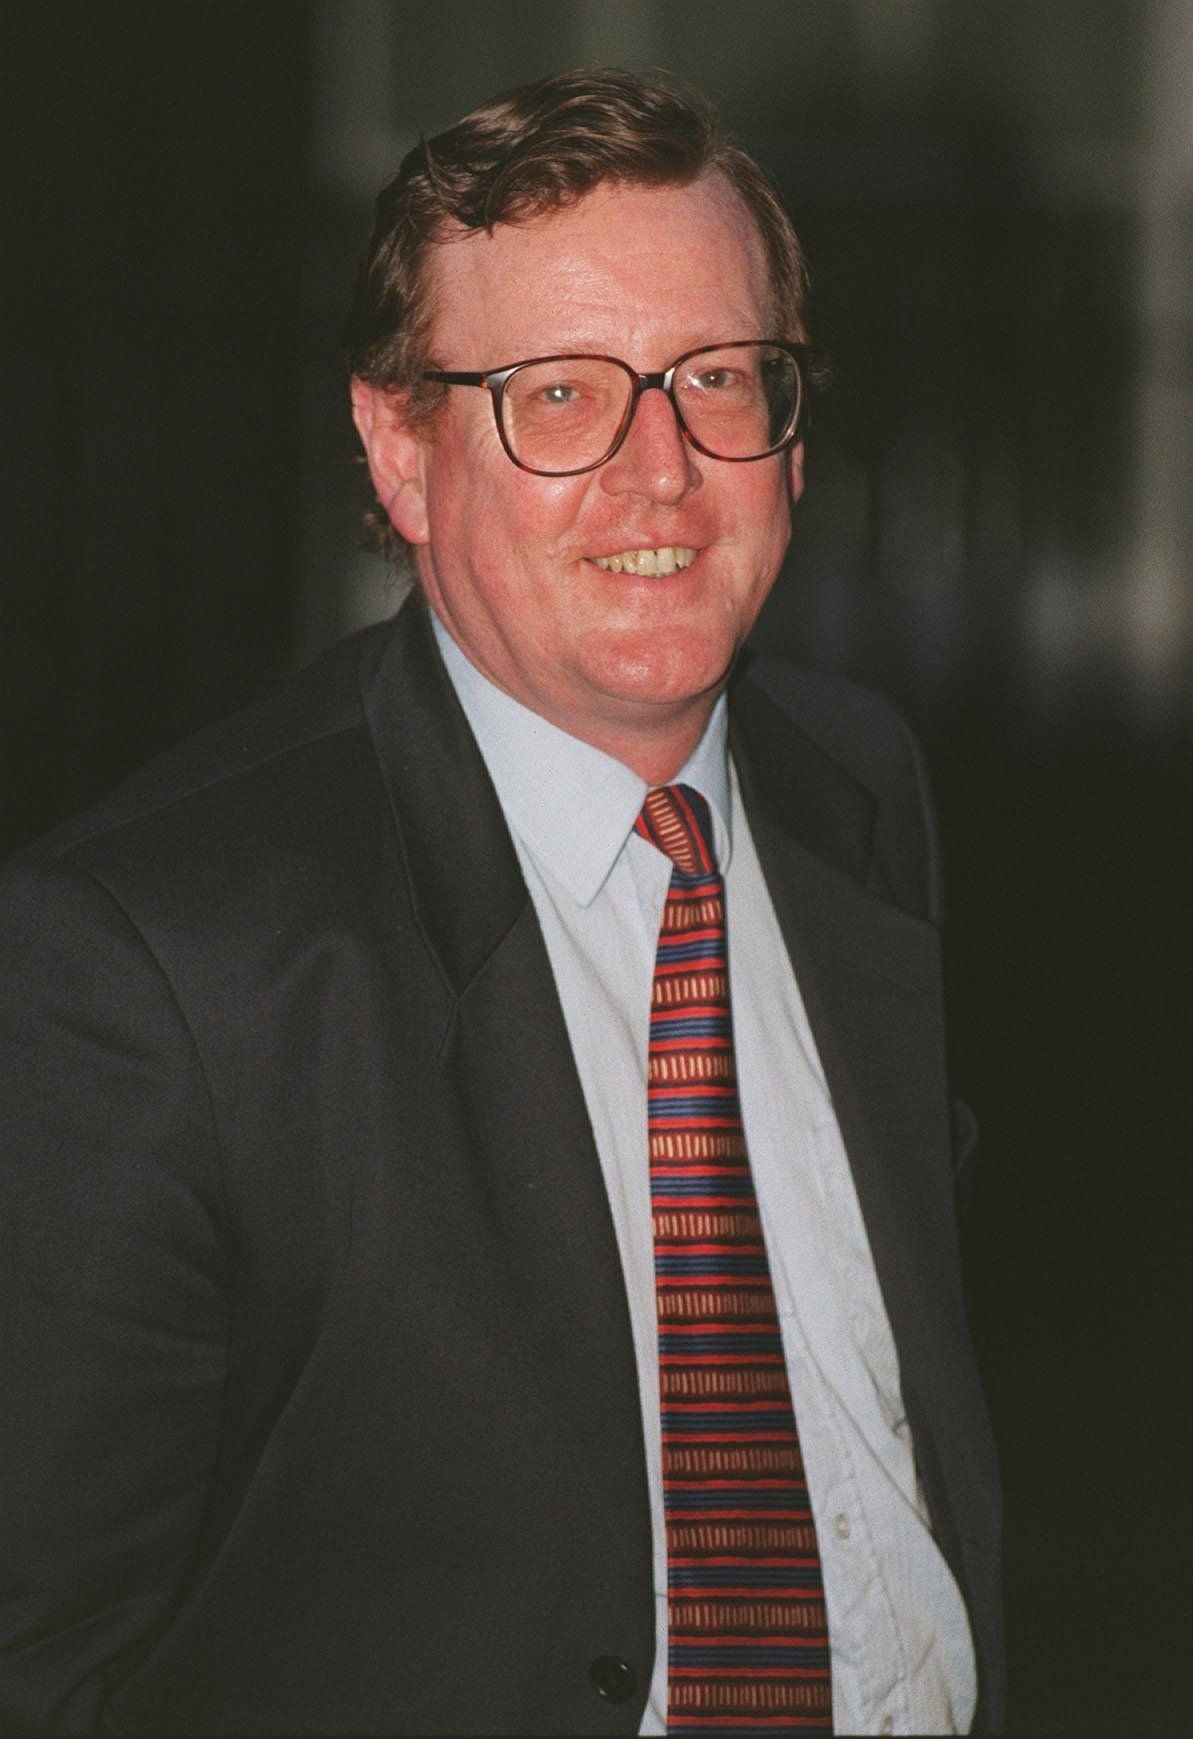 Former UUP leader David Trimble won the Nobel Peace Prize for his role in sealing the landmark deal.